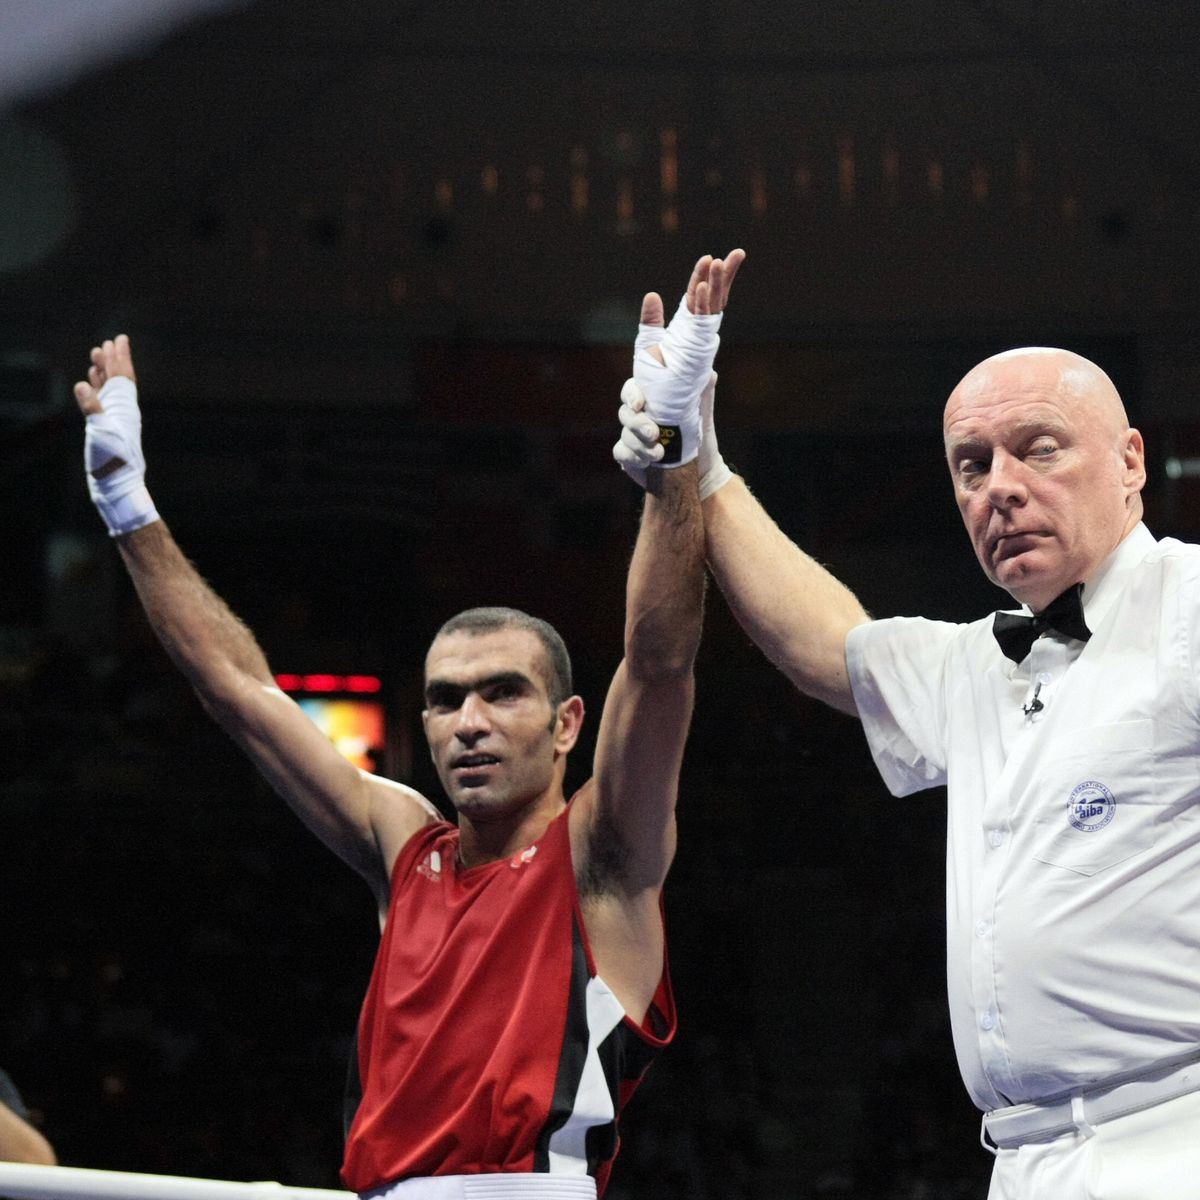 Former boxing referee reveals prostitutes were sent to his room during a tournament as bribe to fix matches at Olympic